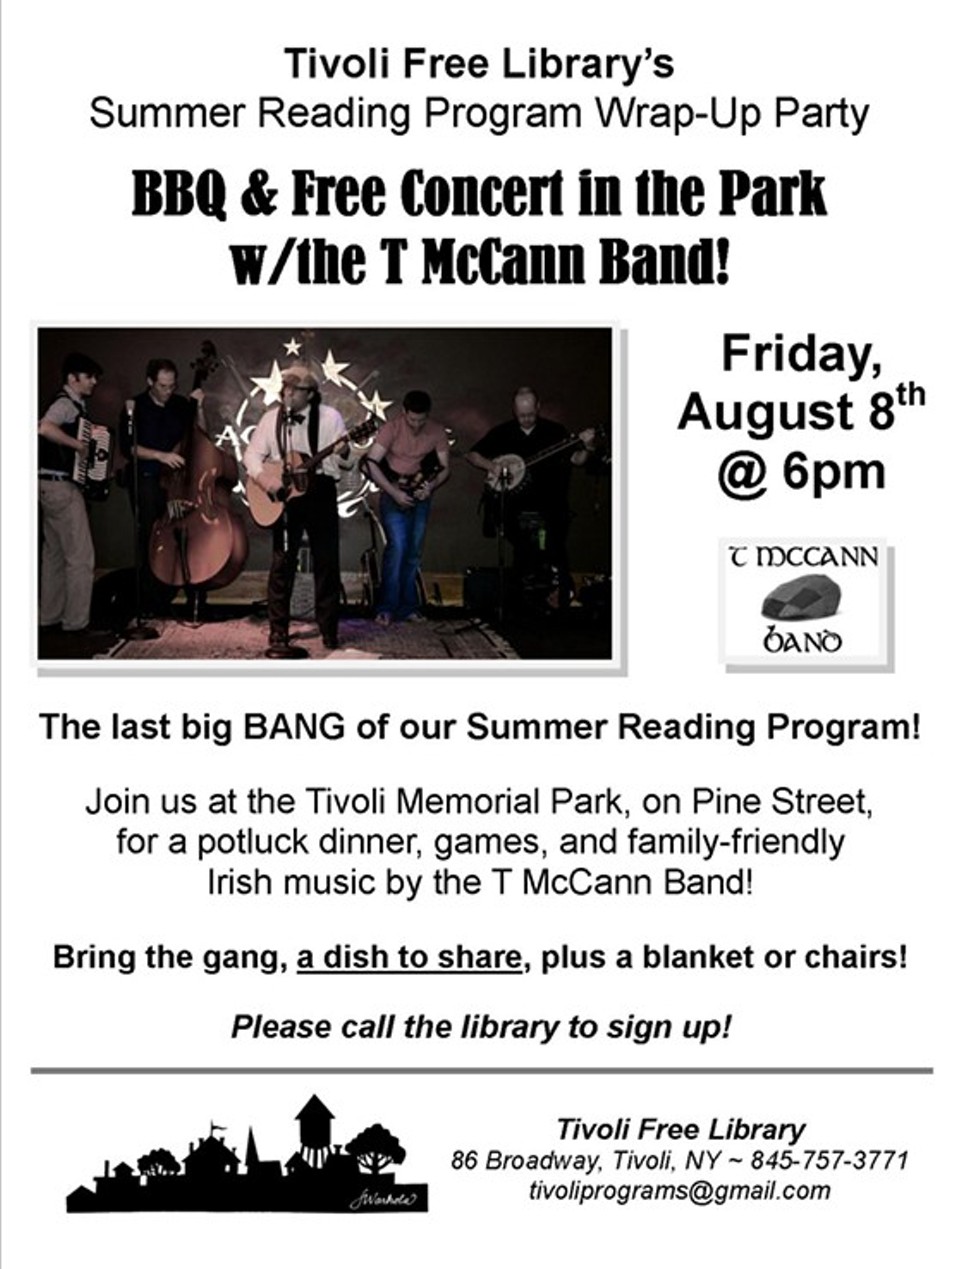 ebc8e28f_bbq_and_concert_in_the_park_w_t_mccann_band_full_page_flyer.jpg